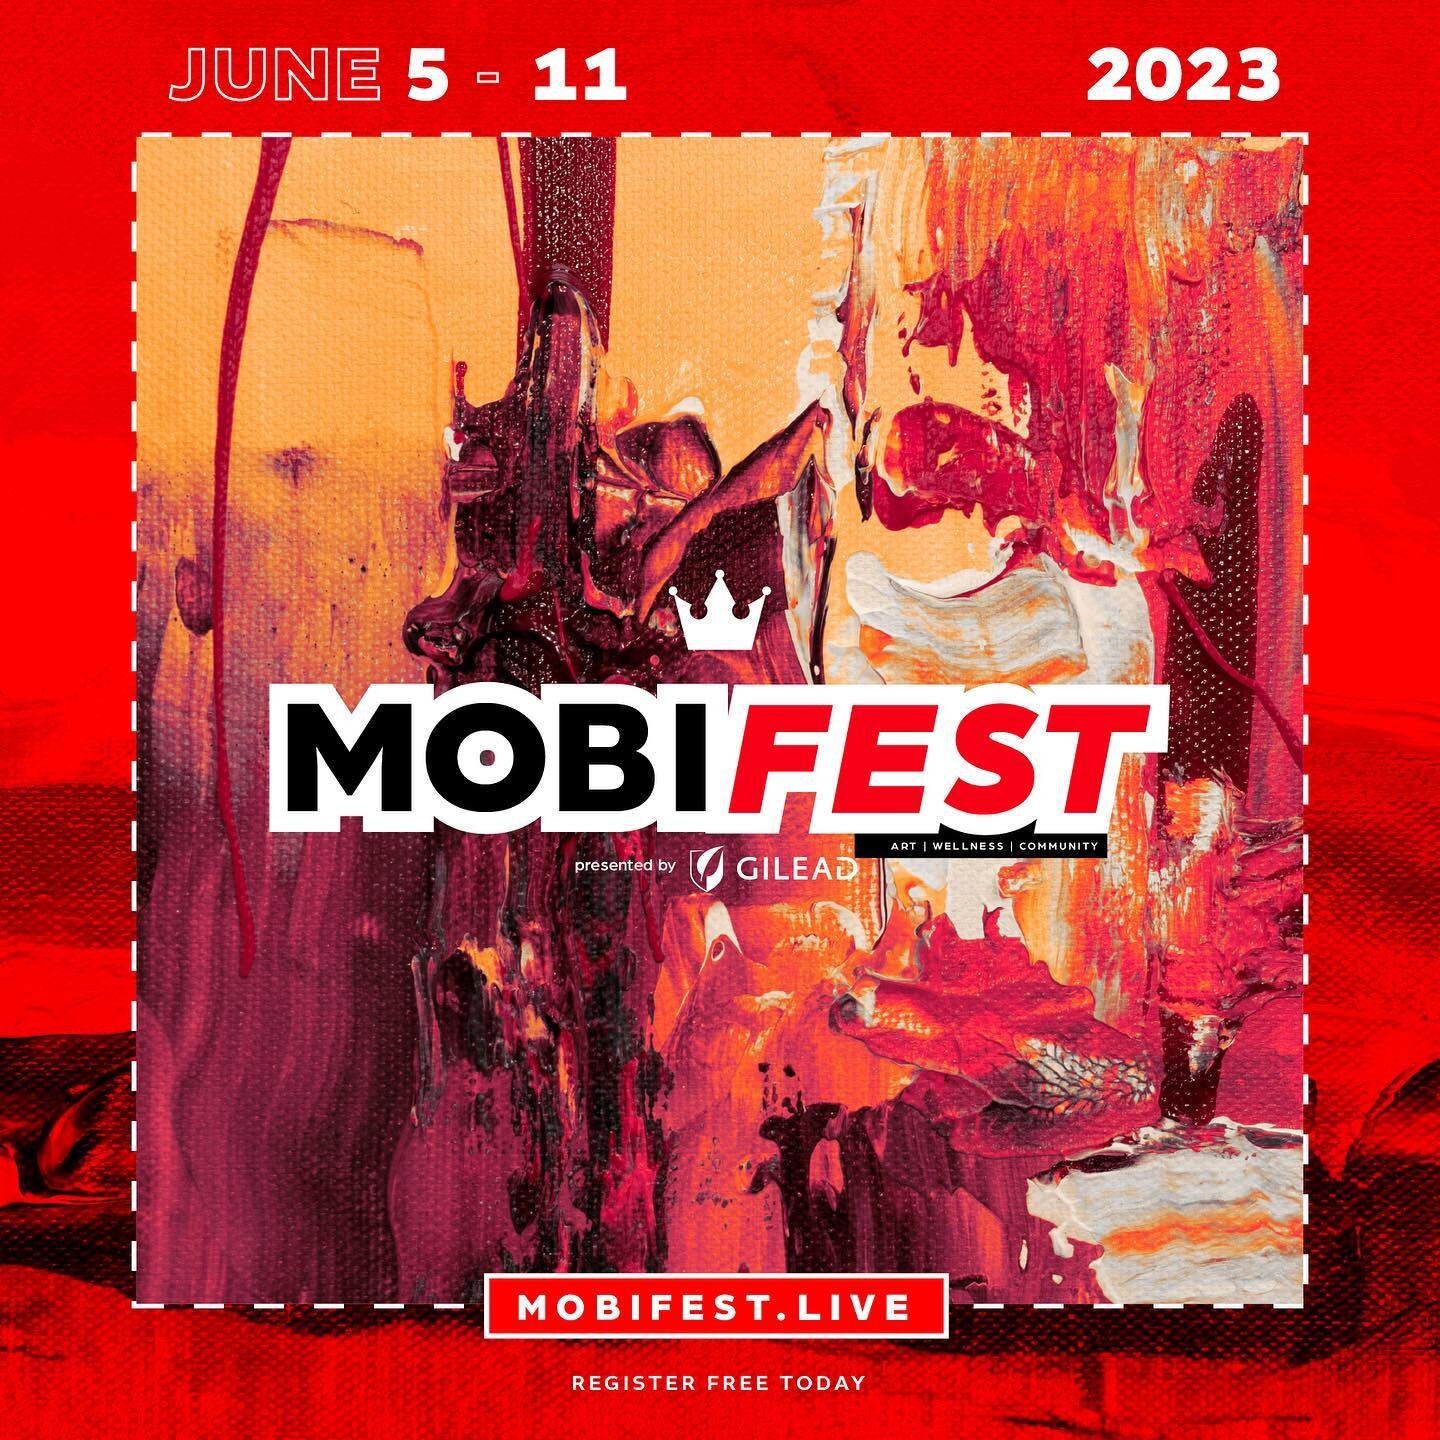 MOBIFEST 2023🔥&hearts;️&hearts;️ 
Save the Dates! June 5th - 11th
A week of inclusive interactions!

REGISTER NOW 
➡️➡️ MOBIFEST.LIVE

LINE UP 📃🖇️&hellip;. Loading!!
(Know you have been patiently waiting)

#fest #MOBIFEST #NYC #2023 #artist #savet